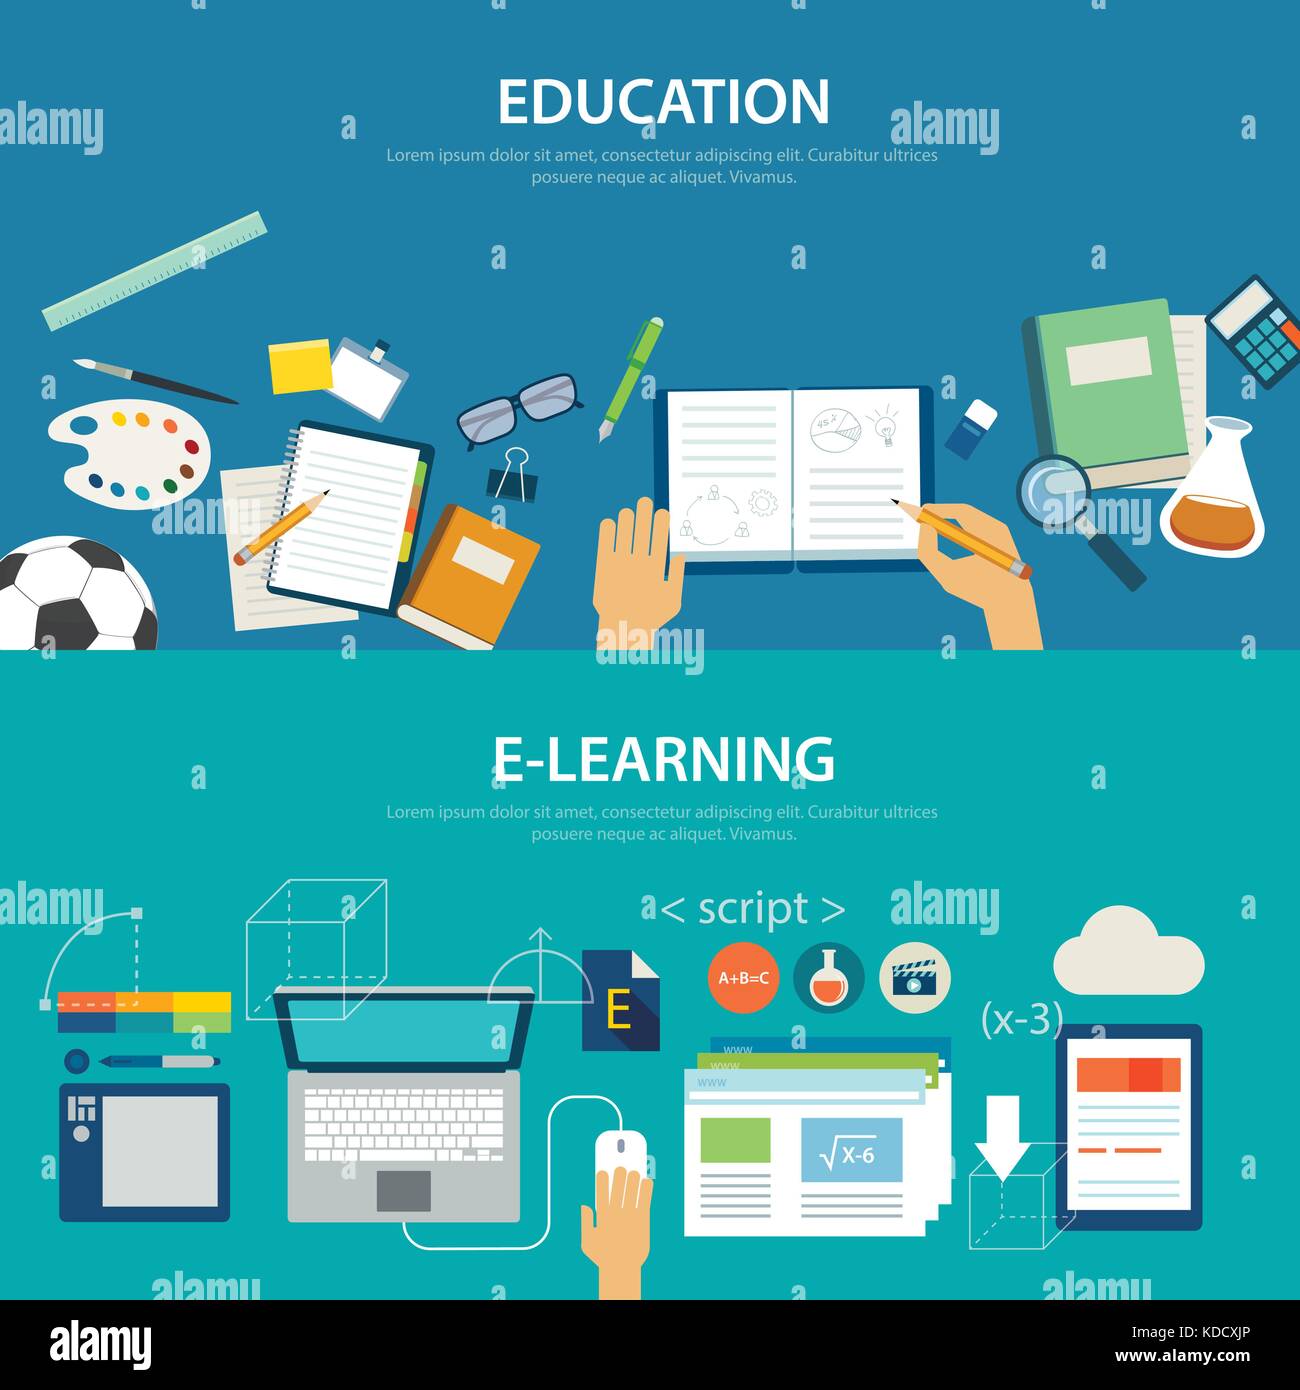 concepts of education and e-learning flat design Stock Vector